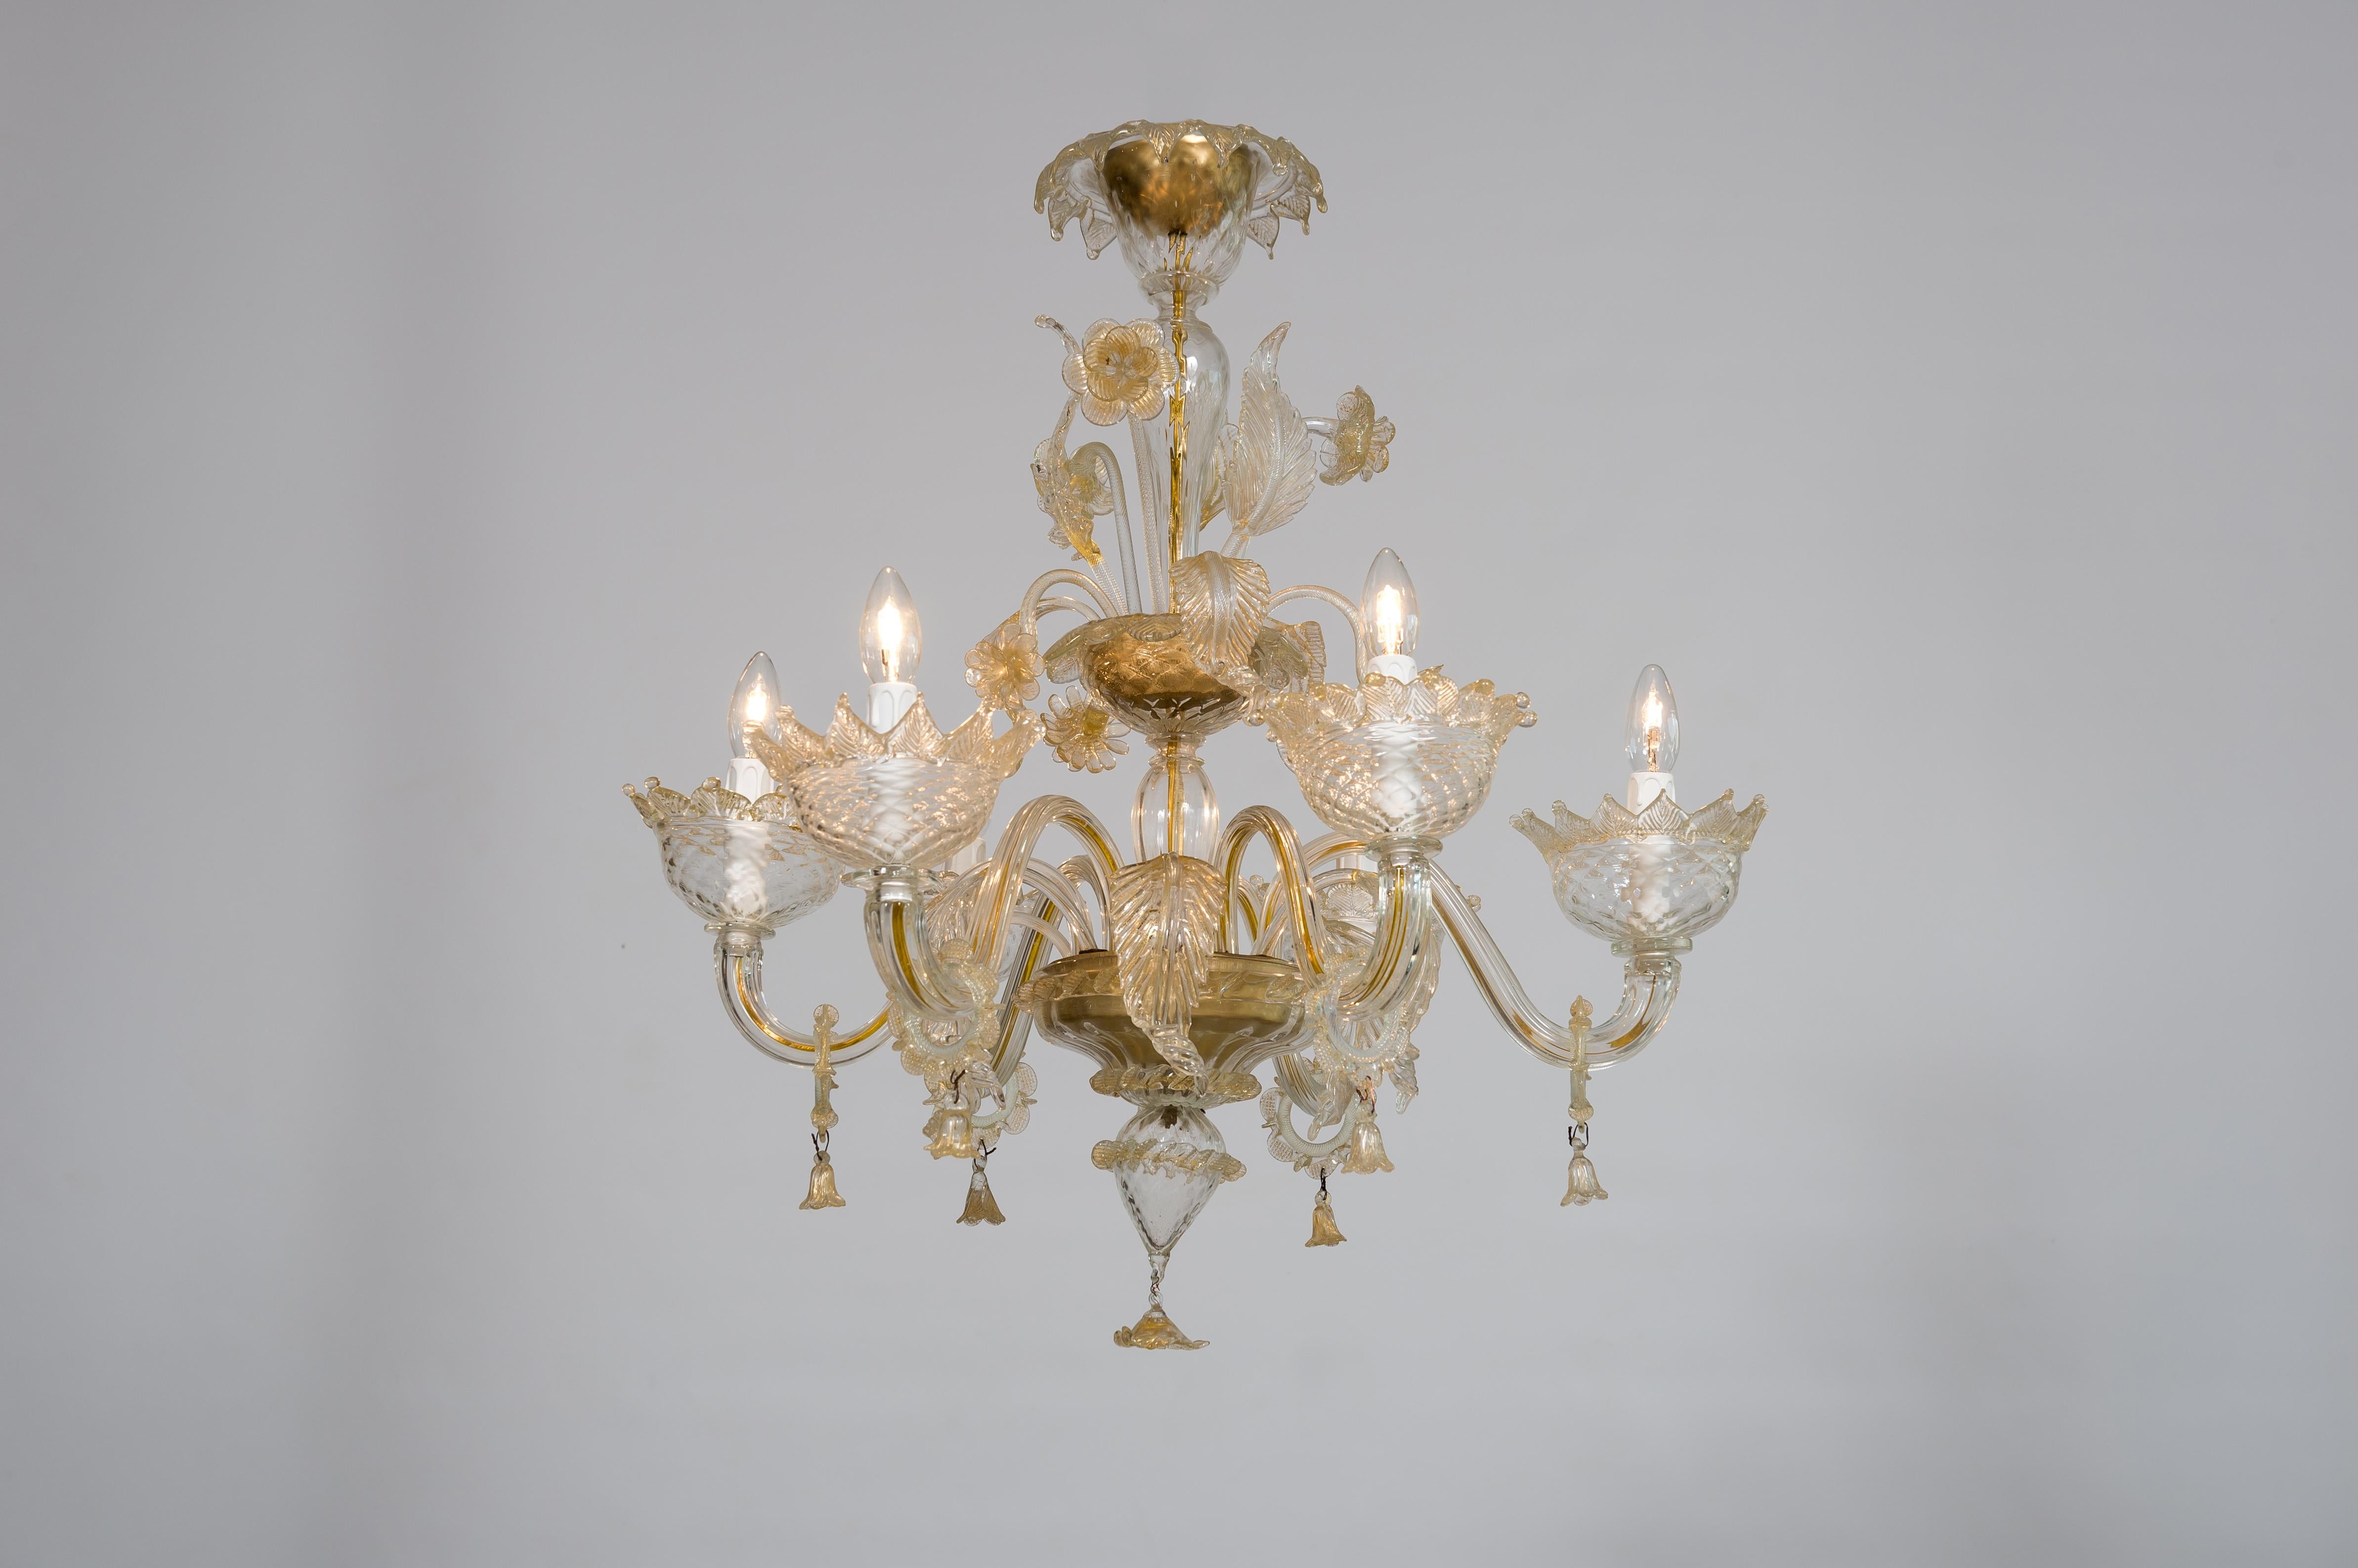 Golden Murano Glass Chandelier with “Vere” Decorations, 20th Century, Italy For Sale 11